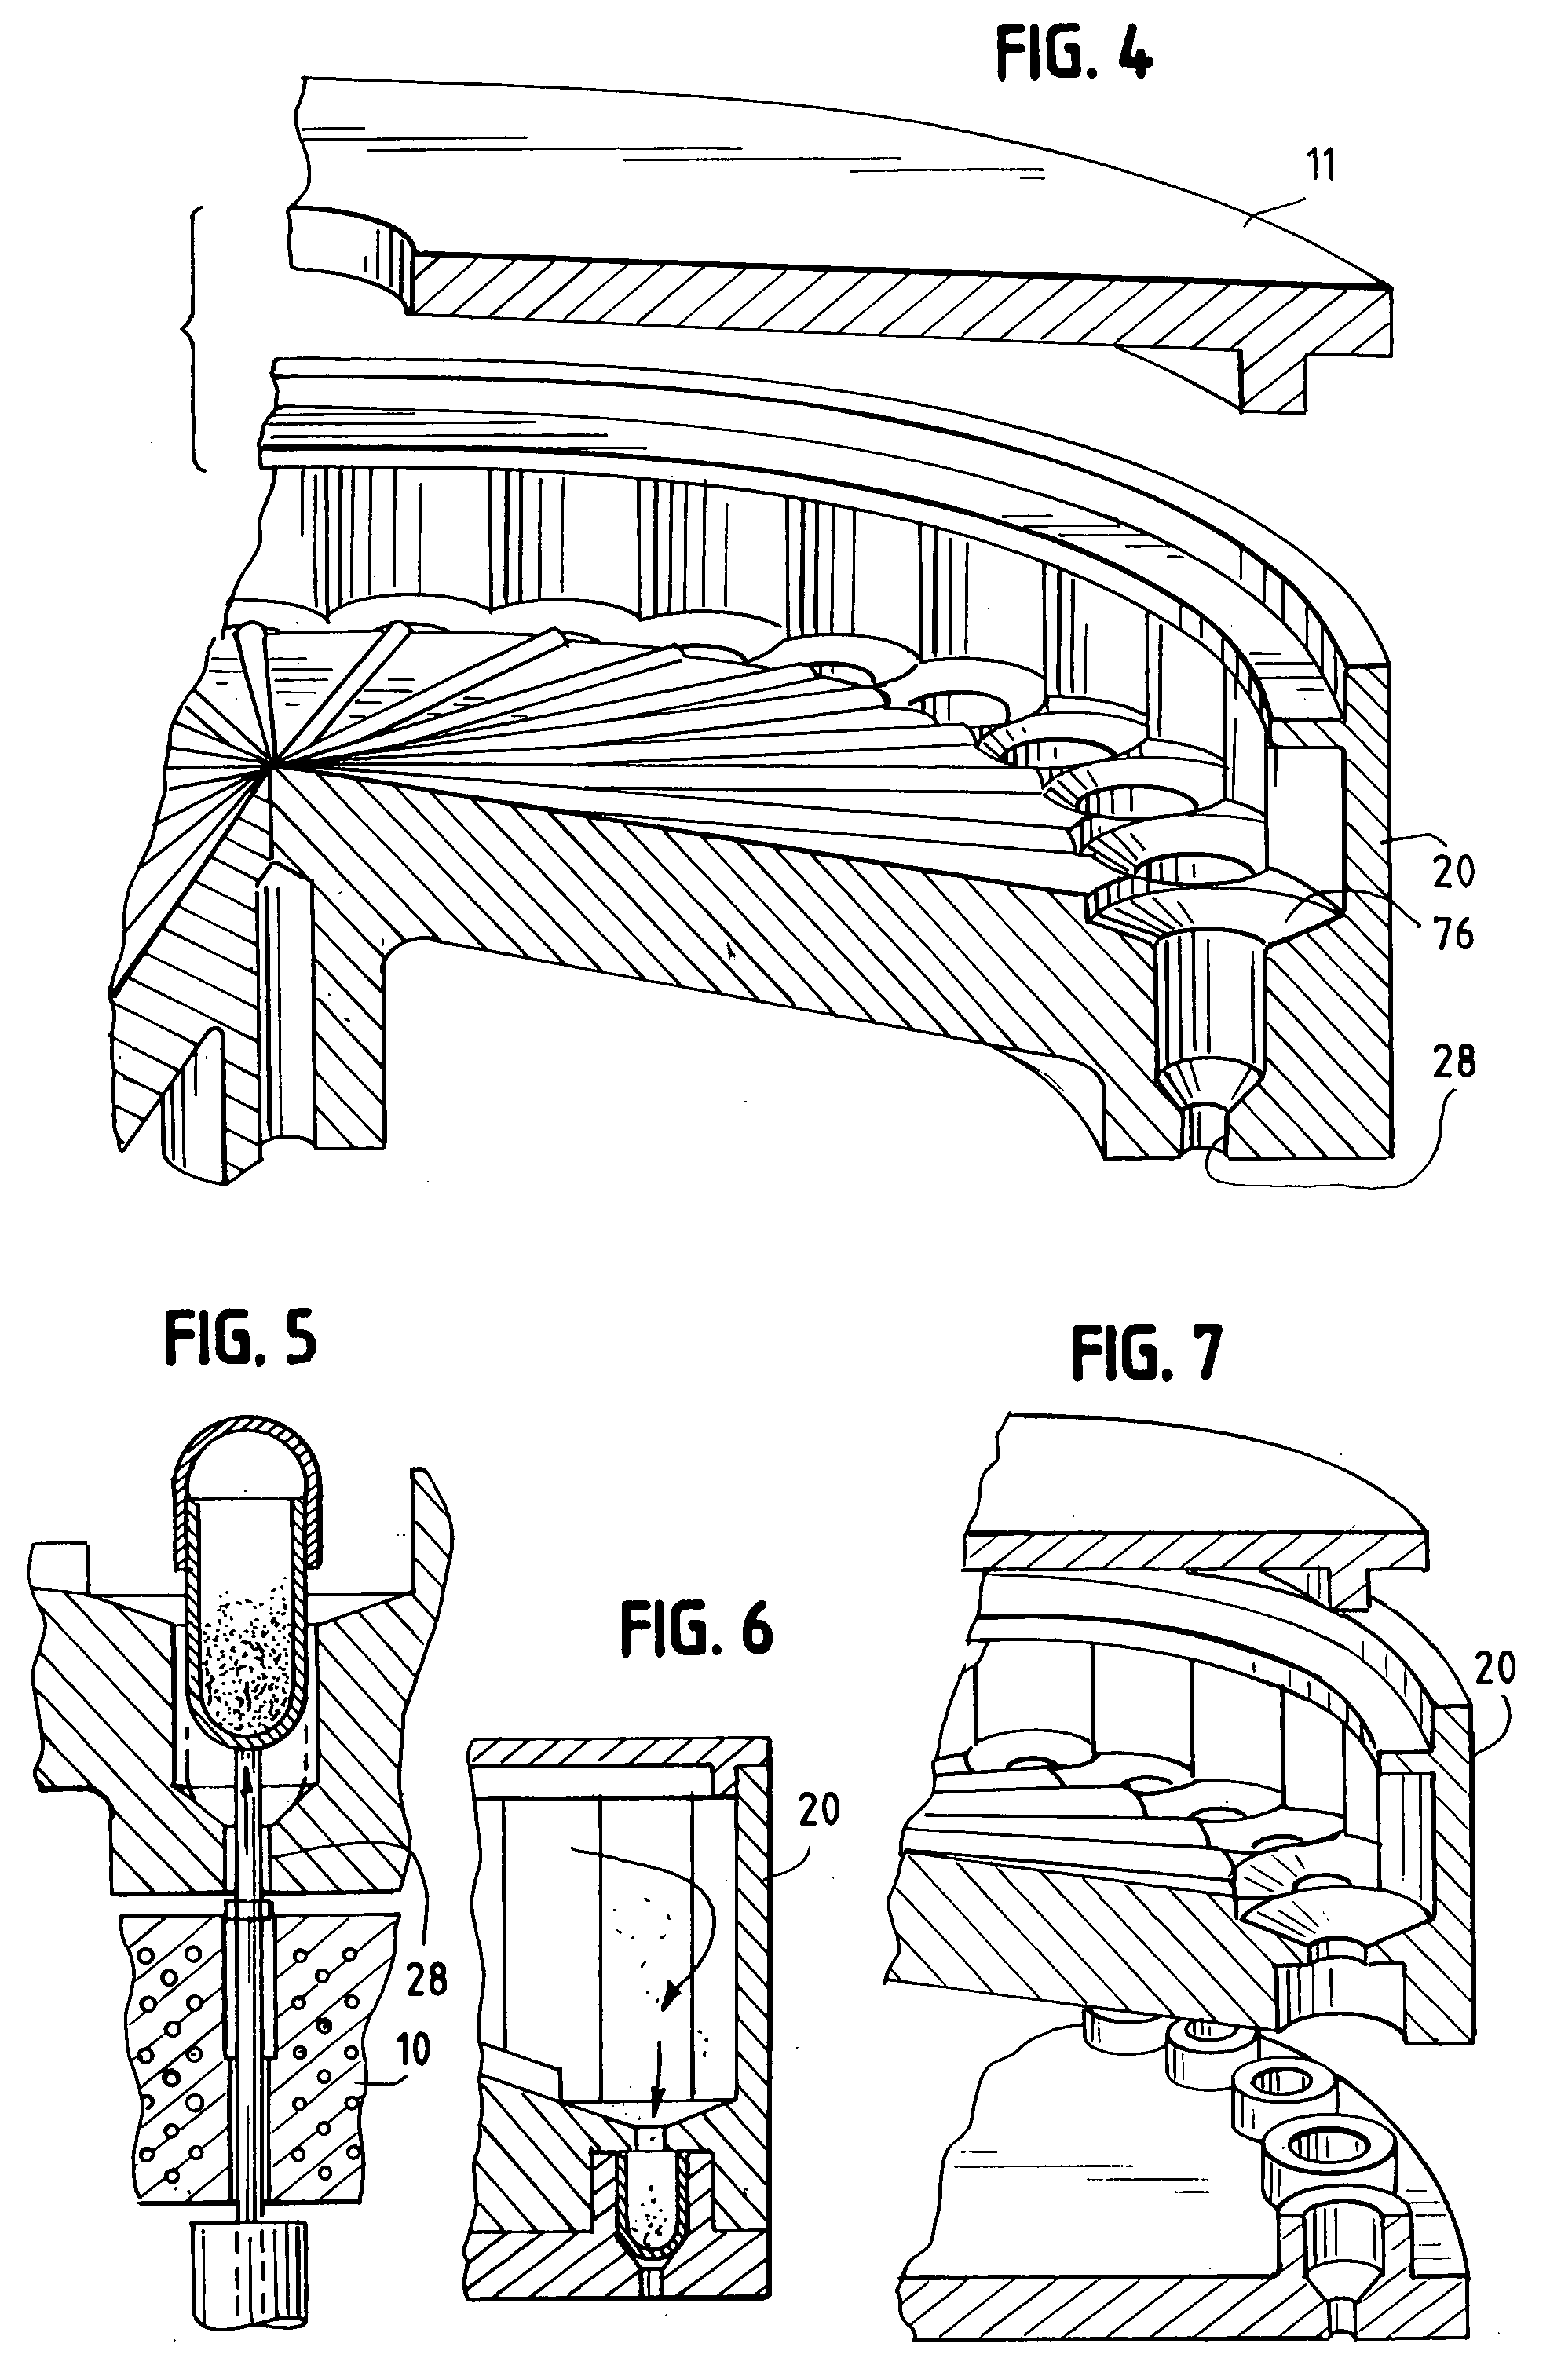 Capsule filling device and method of operation